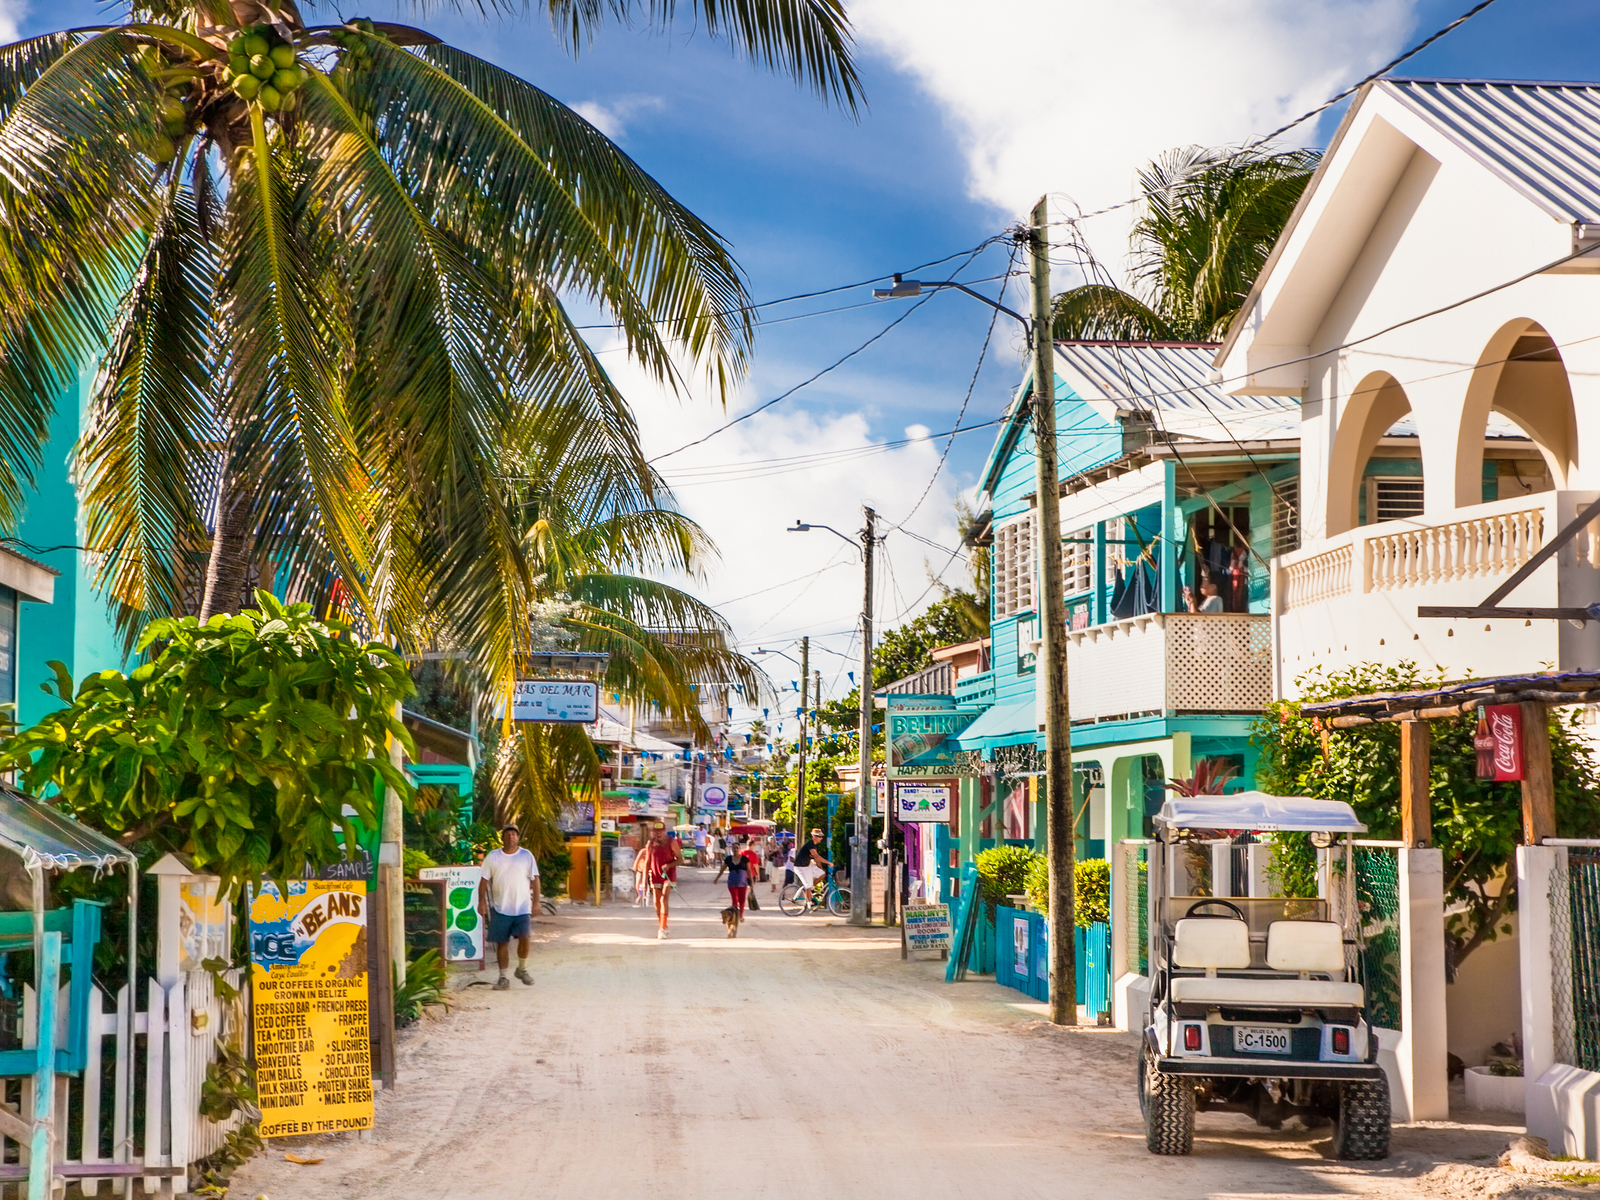 Caye Caulker pictured during the least busy time to visit Belize